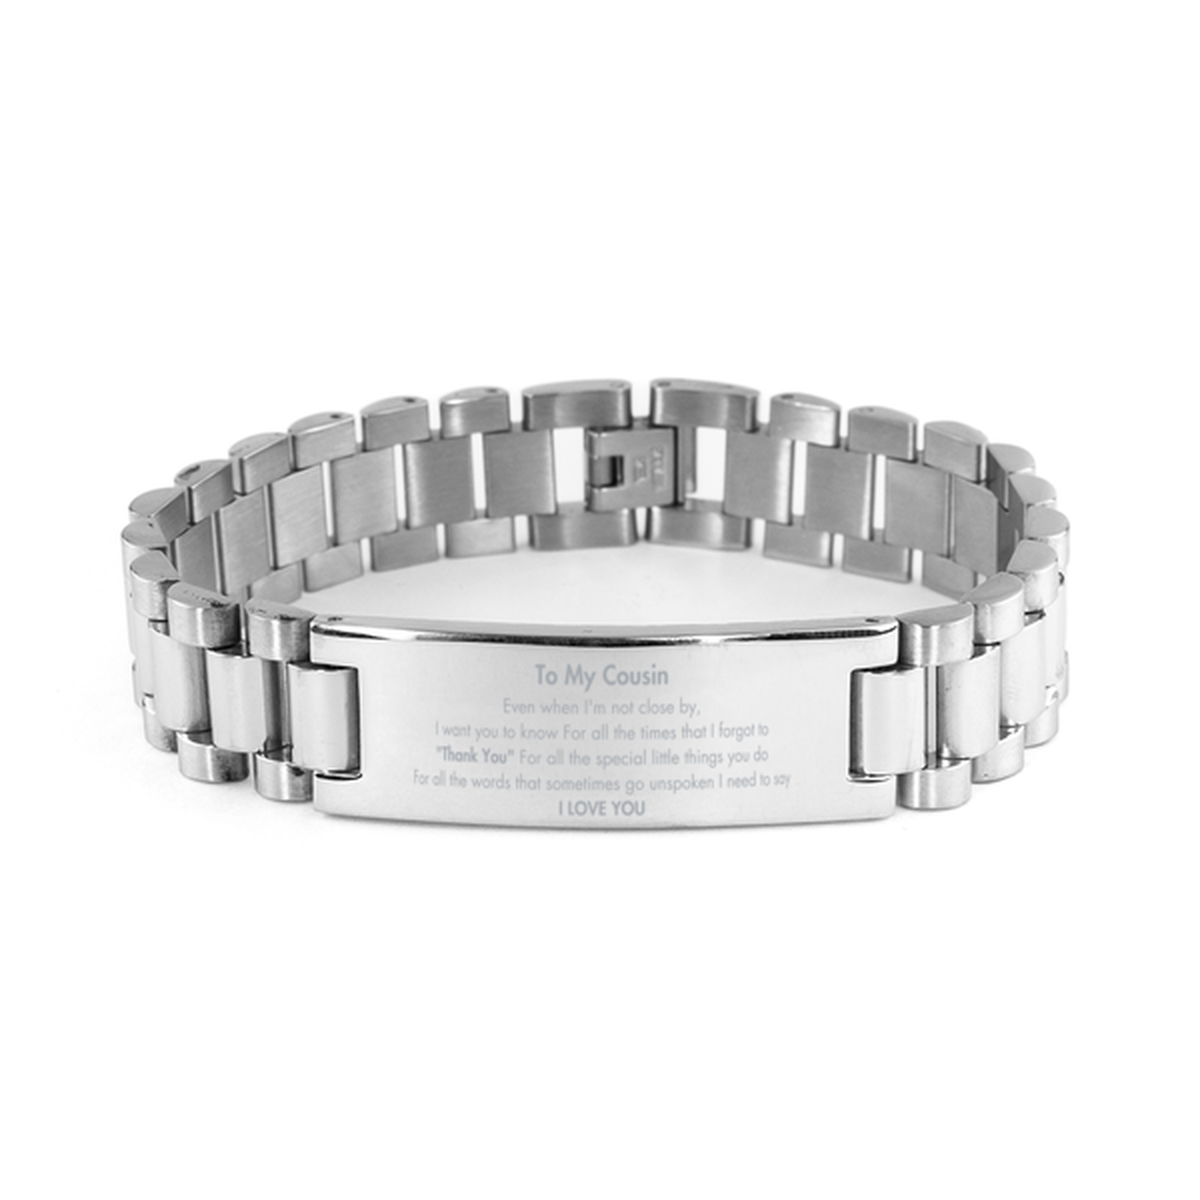 Thank You Gifts for Cousin, Keepsake Ladder Stainless Steel Bracelet Gifts for Cousin Birthday Mother's day Father's Day Cousin For all the words That sometimes go unspoken I need to say I LOVE YOU